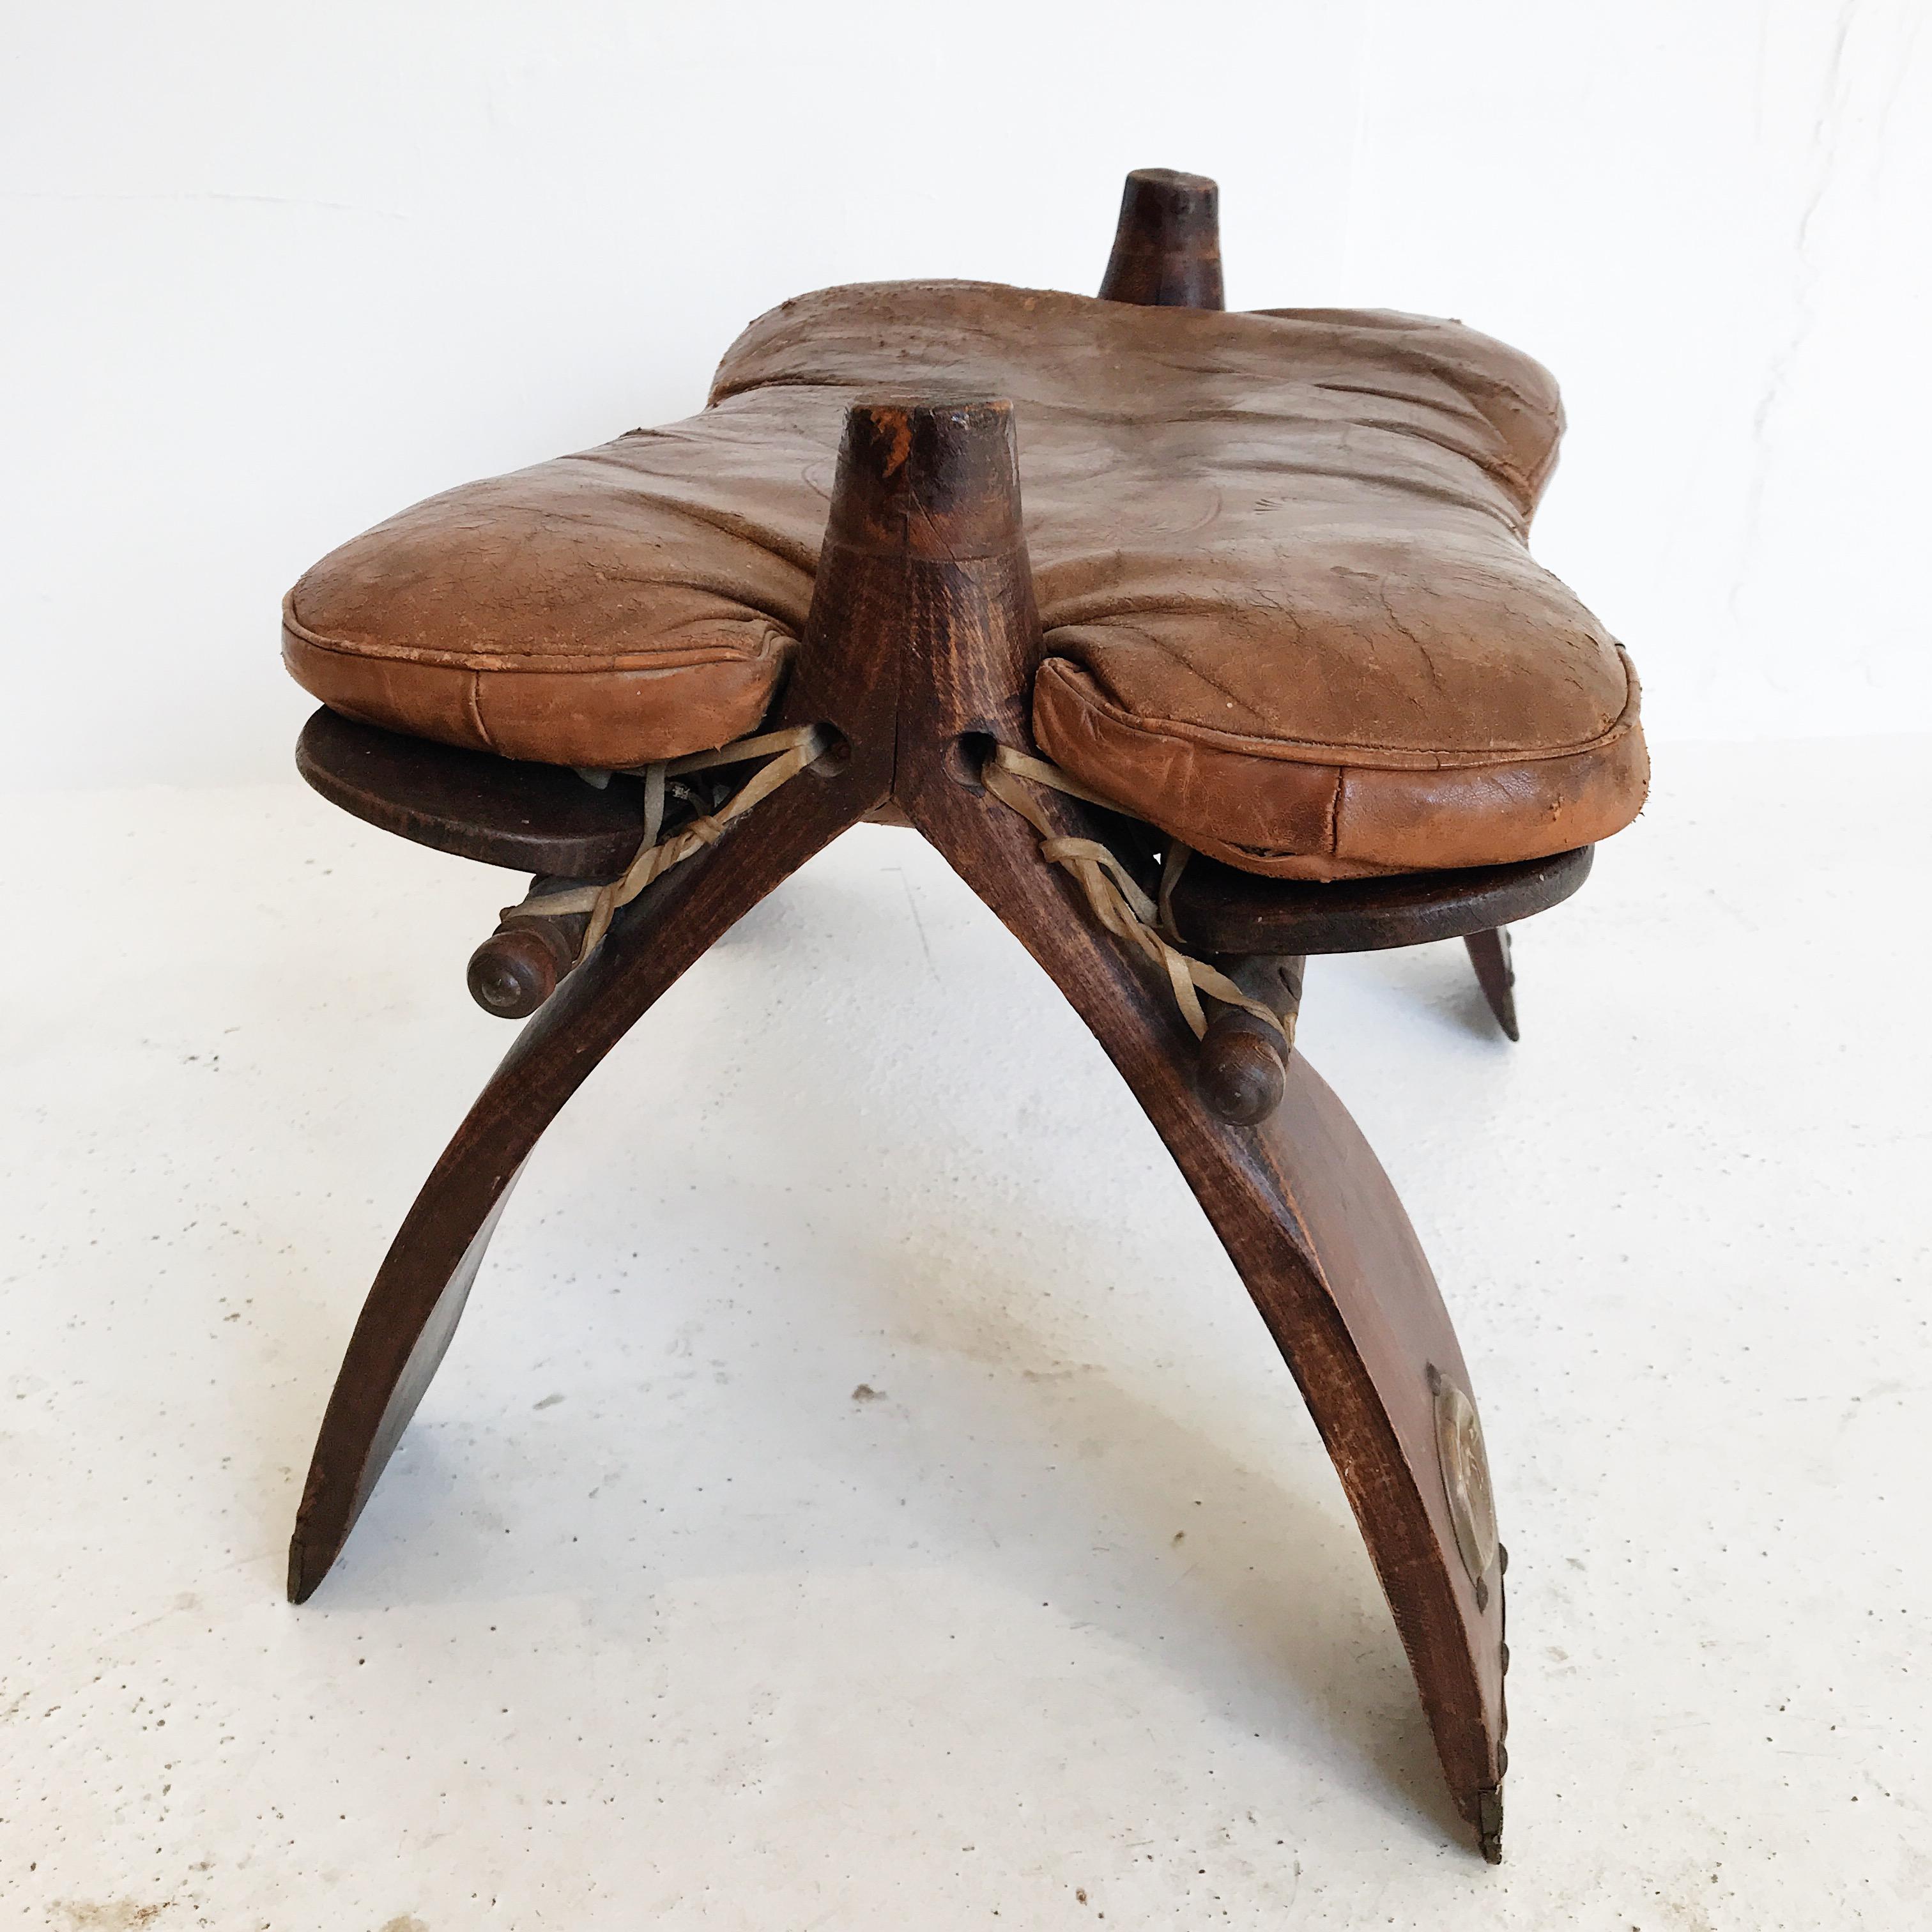 Mid-20th Century Egyptian Wooden Camel Saddle Stool with Original Leather Saddle For Sale 1